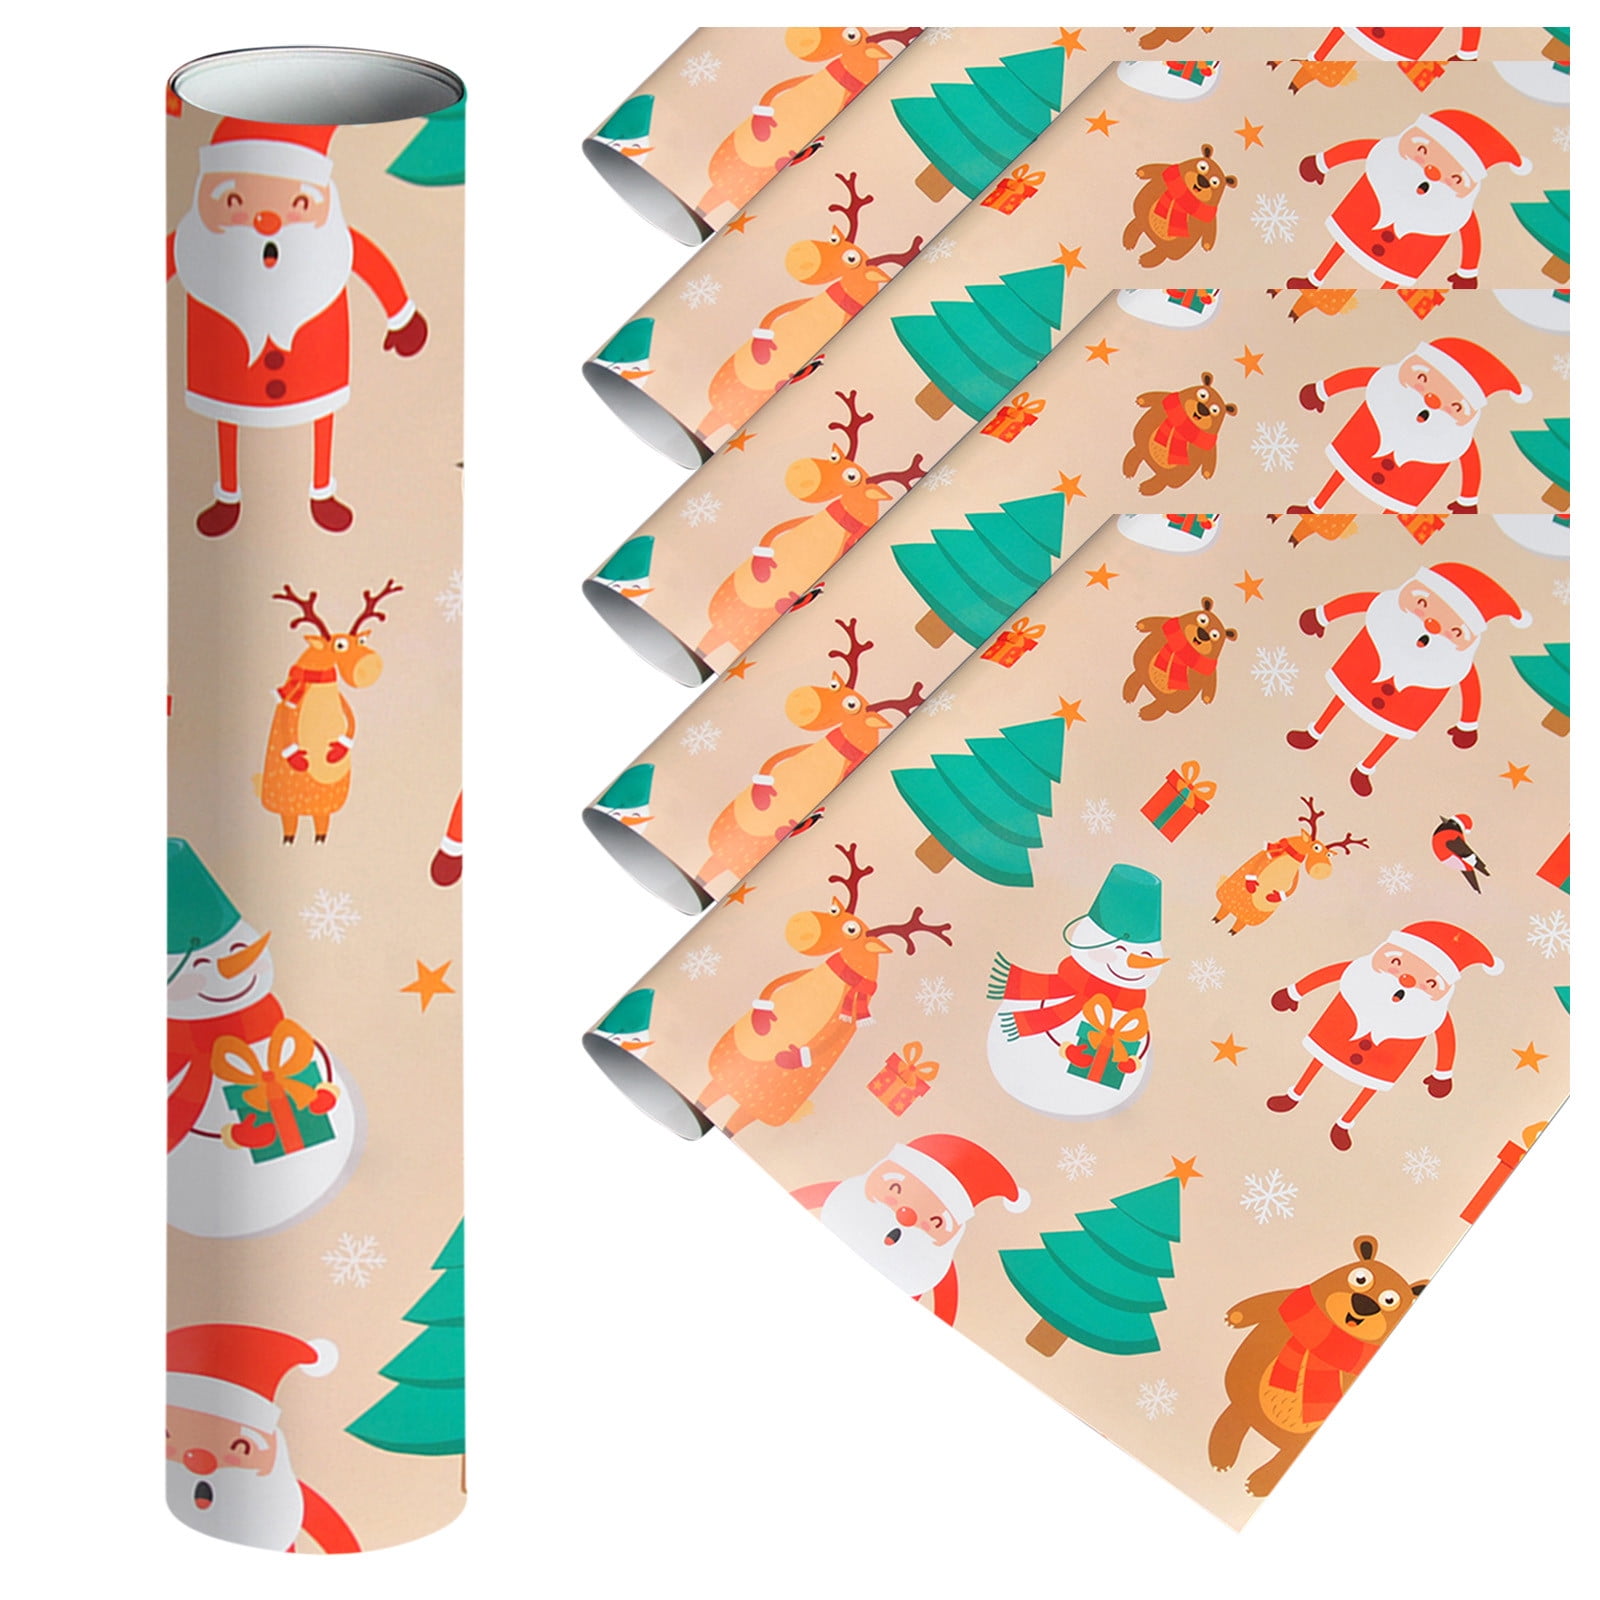 Miayilima 5PCs ( 75cmX50cm)Single-sided Christmas Wrapping Paper, Classic  Santa Claus And Patterns G 